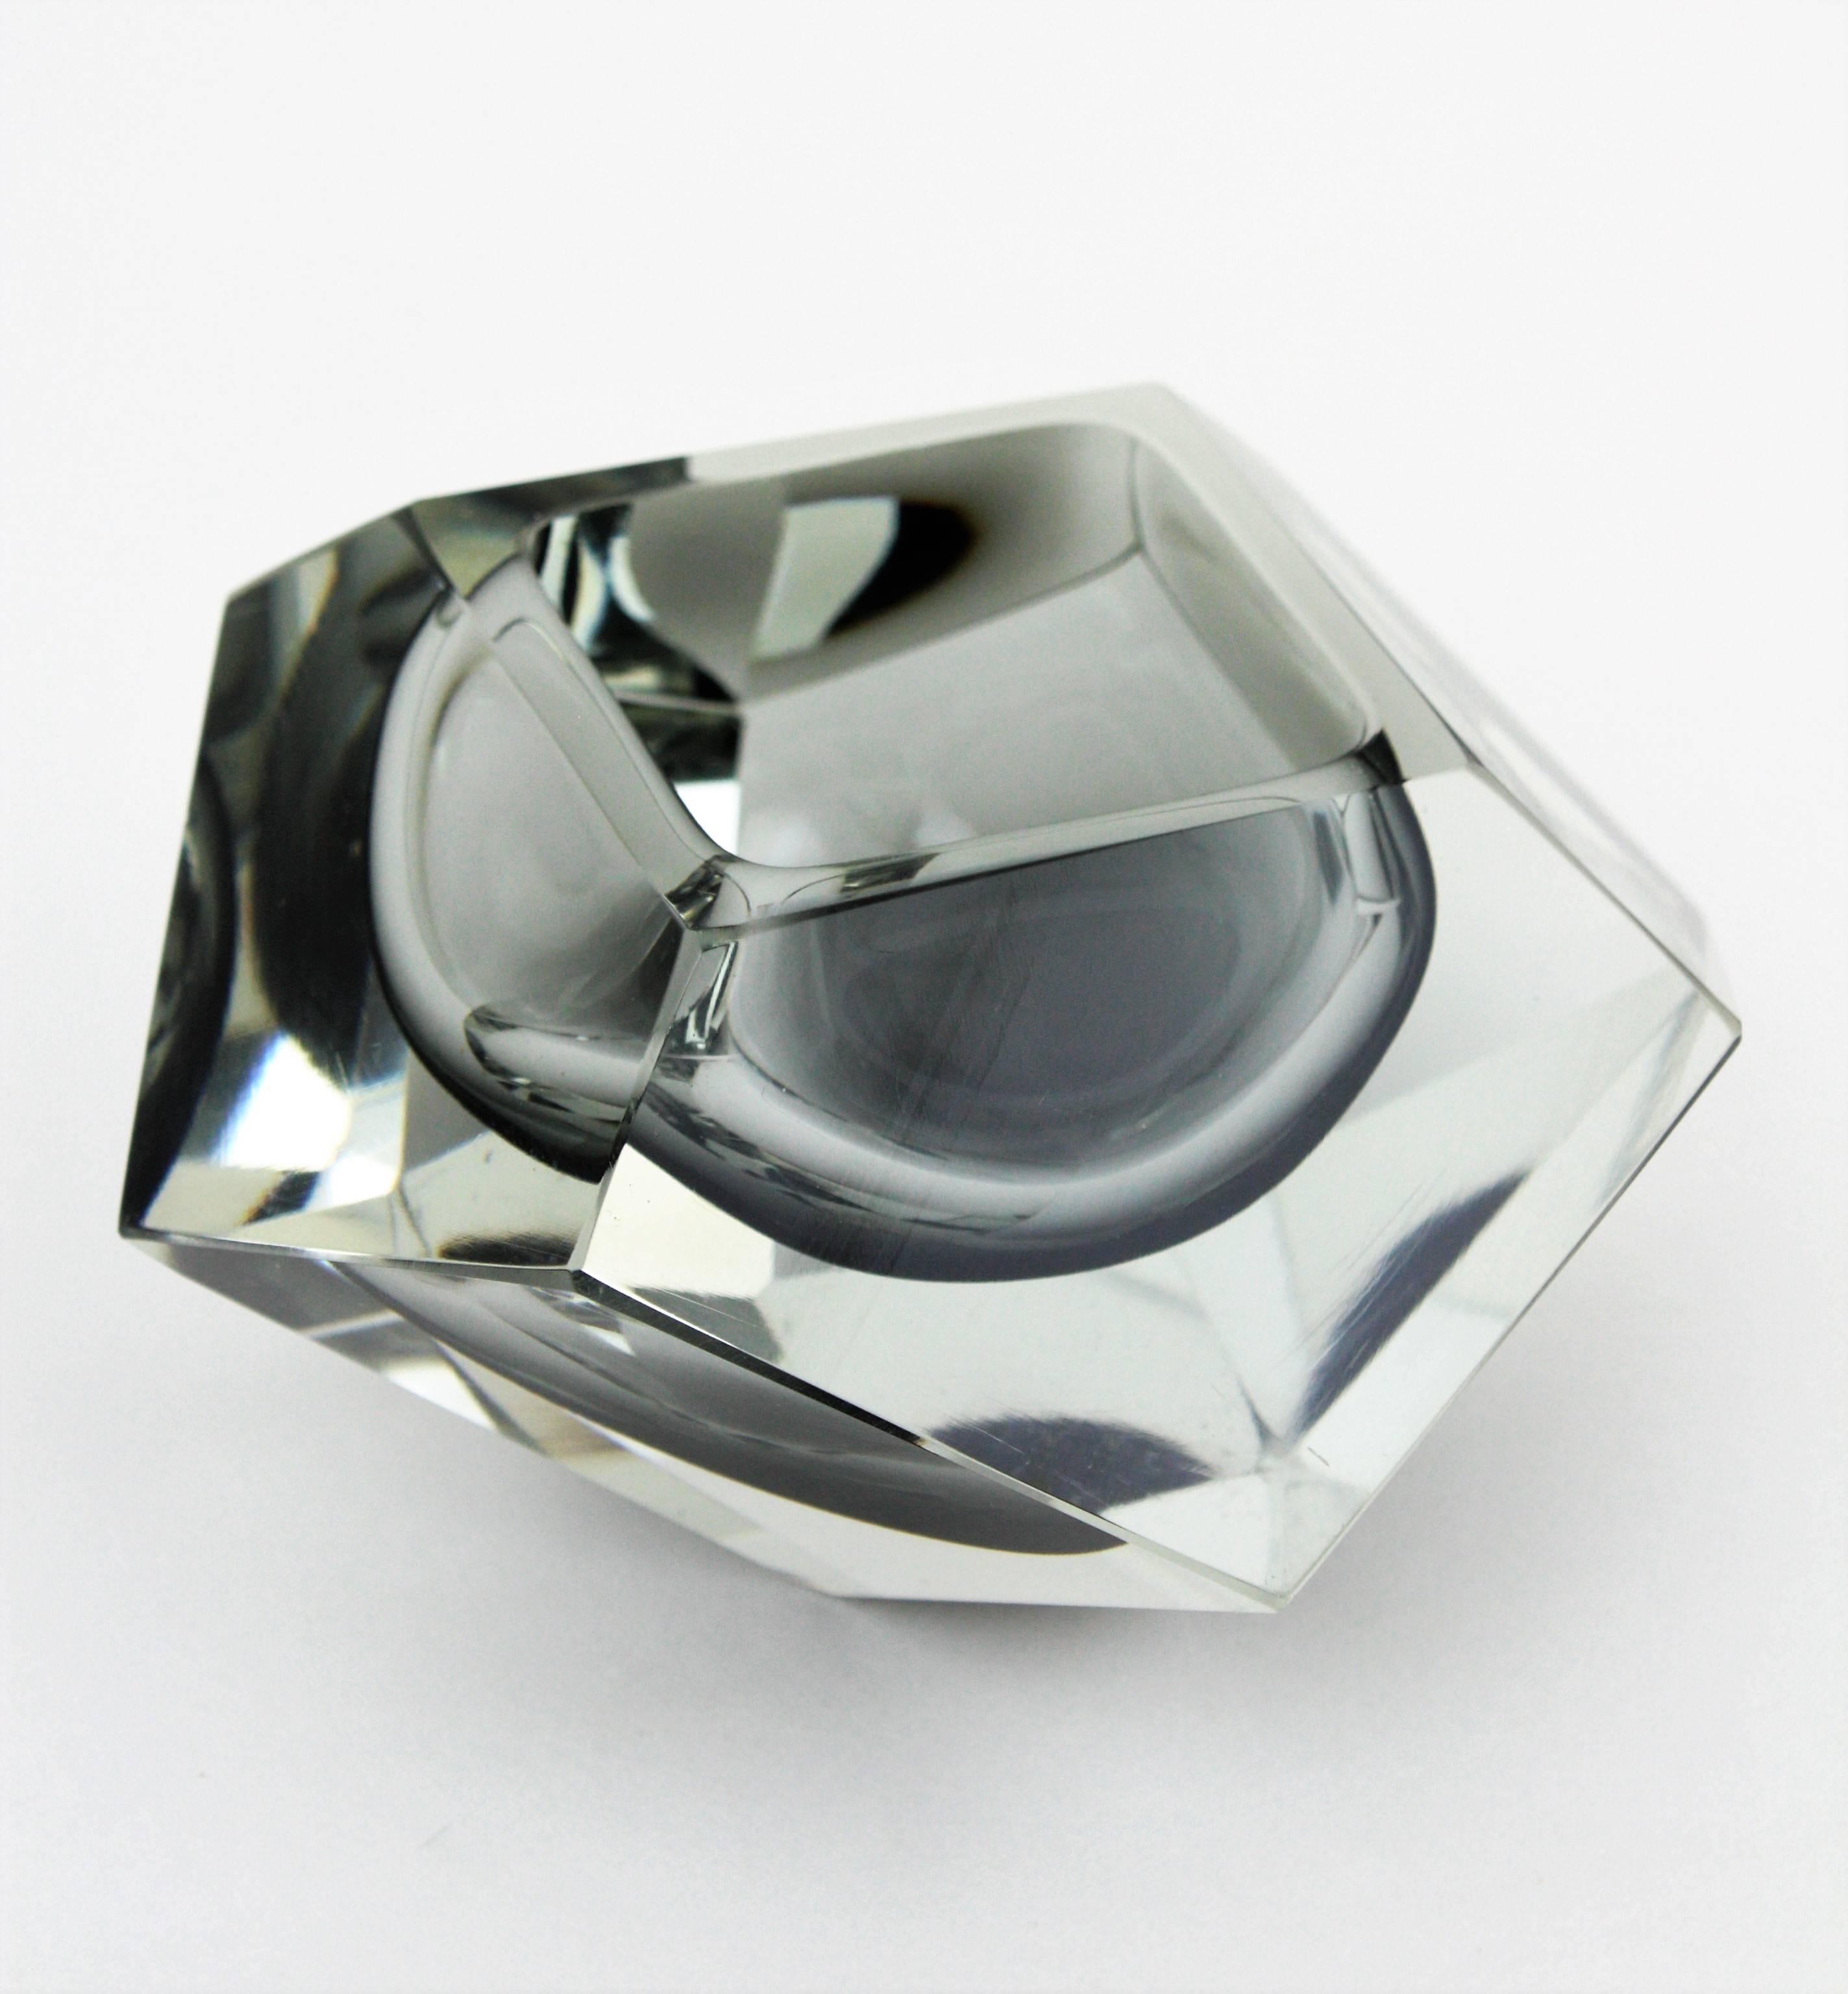 Unusual giant sized 12 faces faceted Flavio Poli Sommerso Murano glass bowl in grey color cased into clear glass. Amazing shape and heavy piece in excellent condition. Useful as candy bowl, jewelry bowl, ashtray or paperweight,
Italy, 1950s.

 